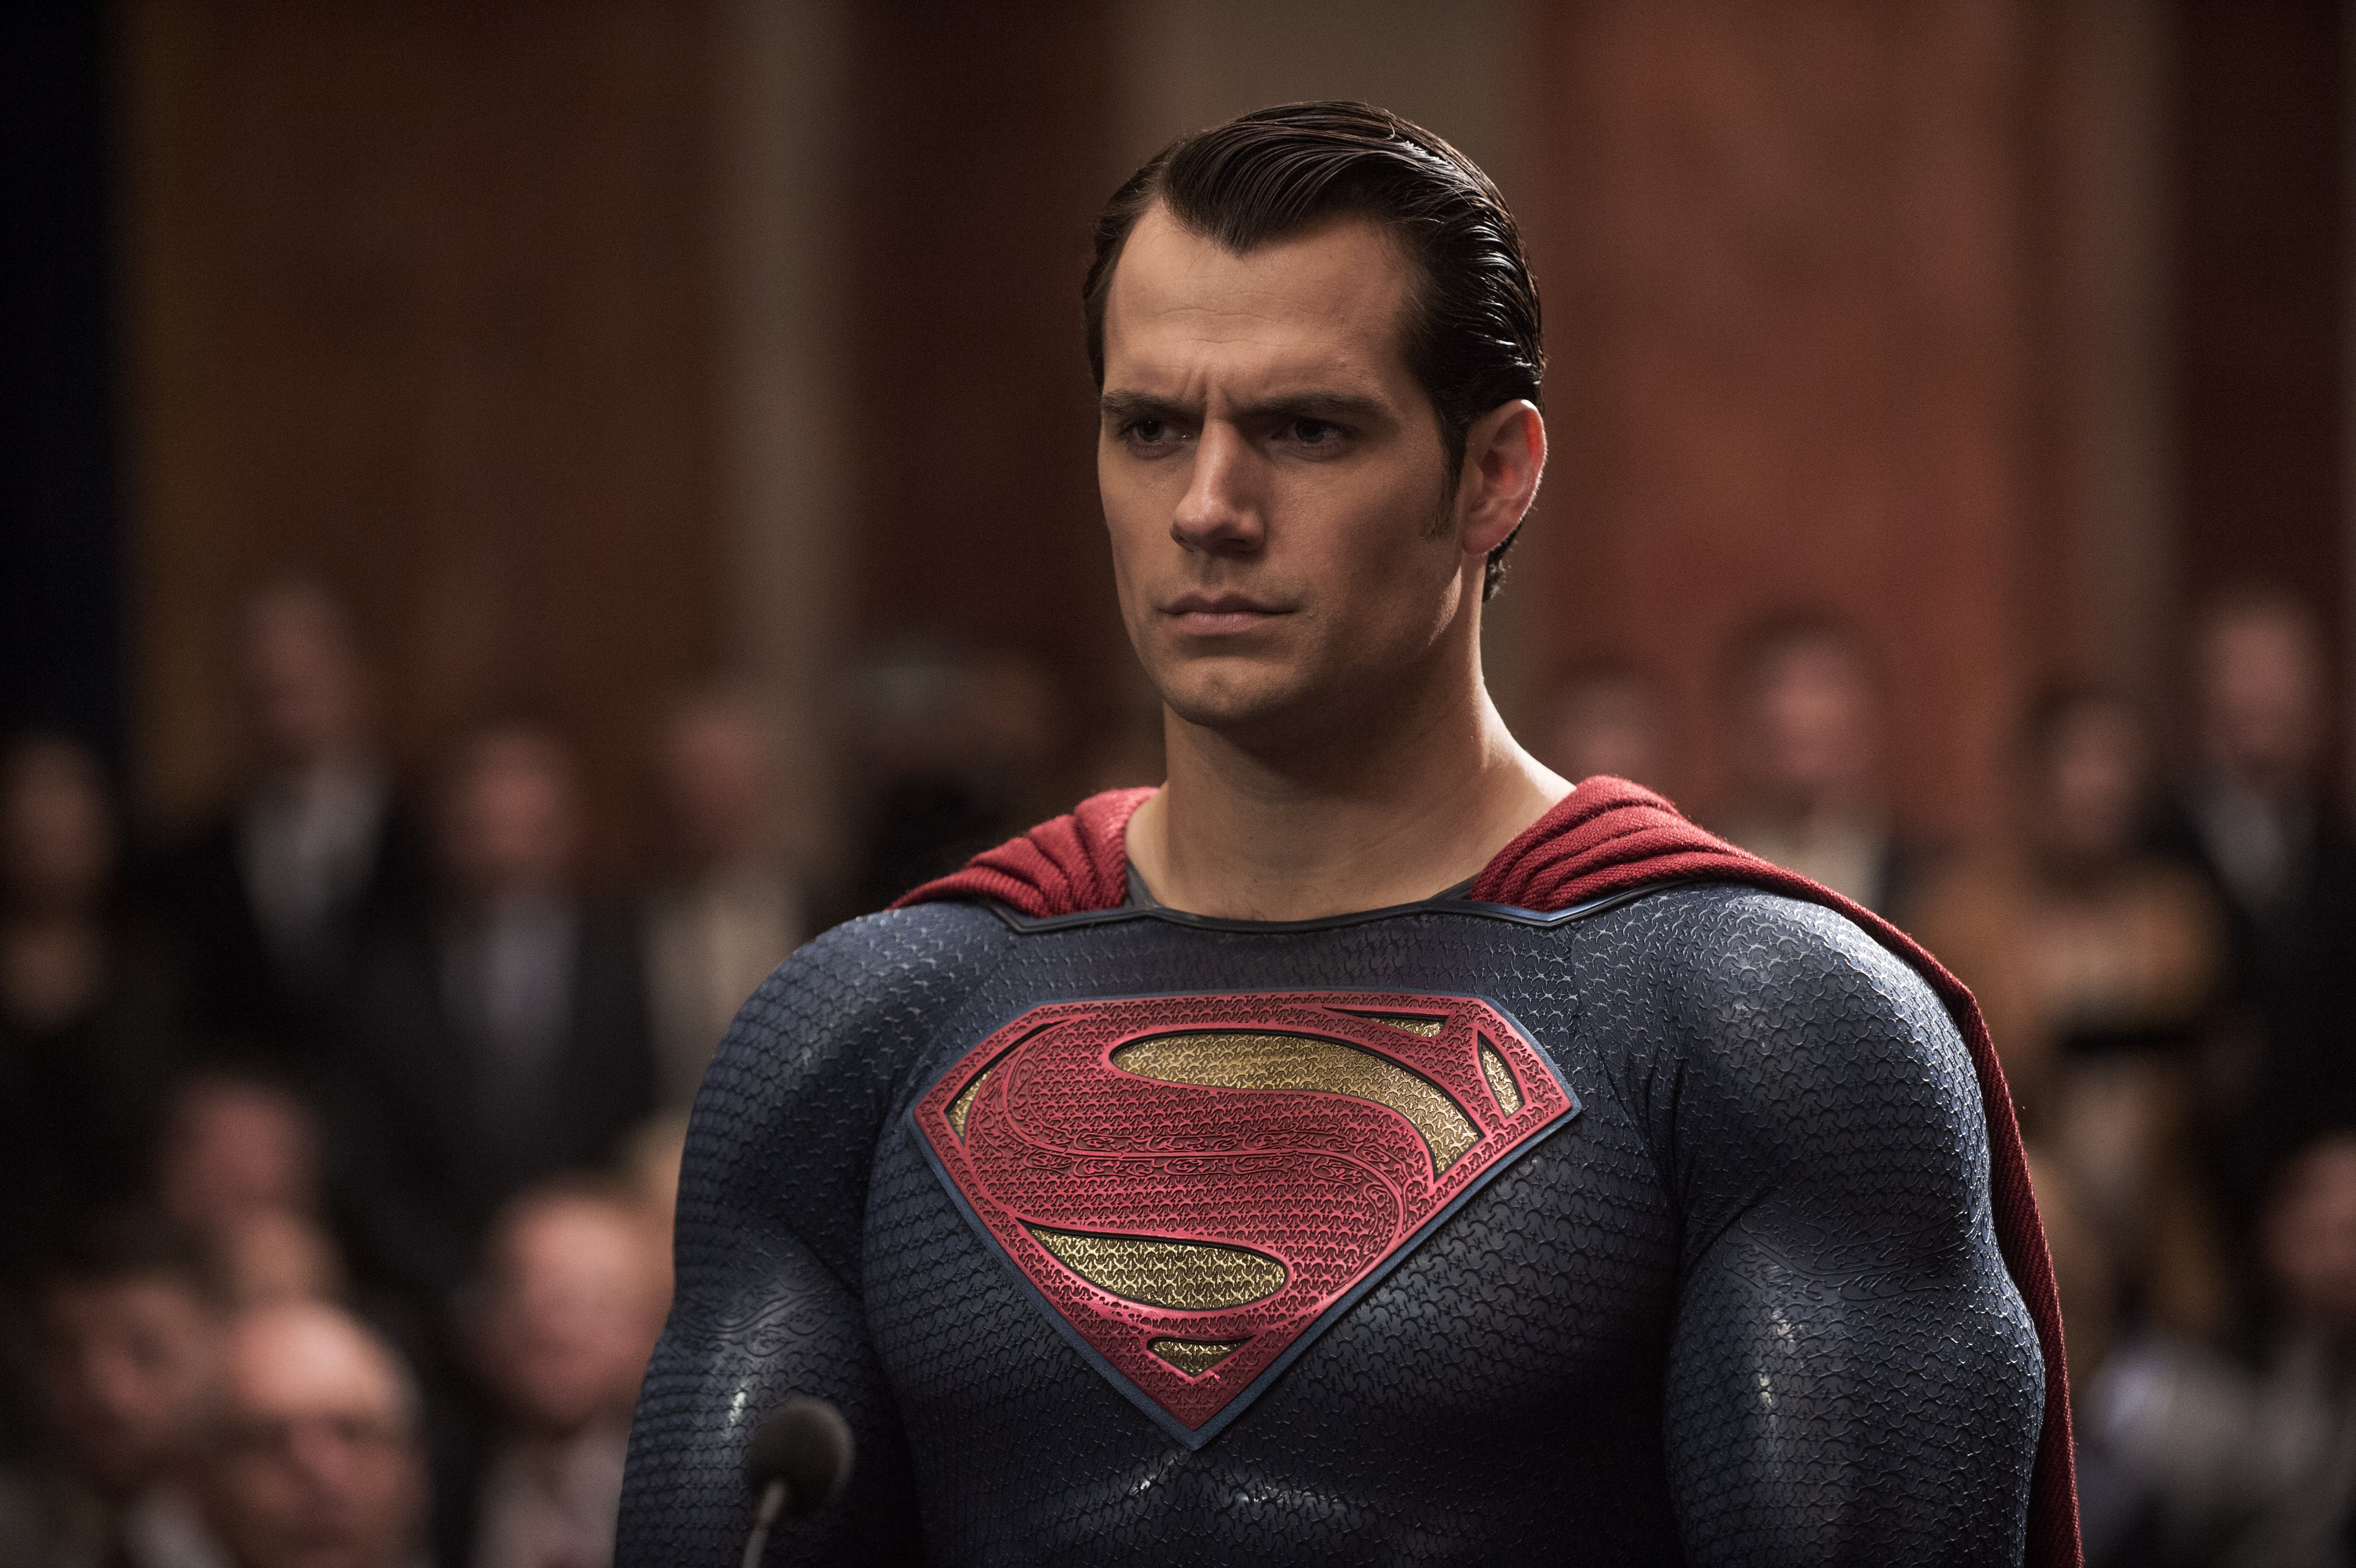 Henry Cavill as Superman in Warner Bros. Pictures' 'Batman v. Superman: Dawn of Justice'